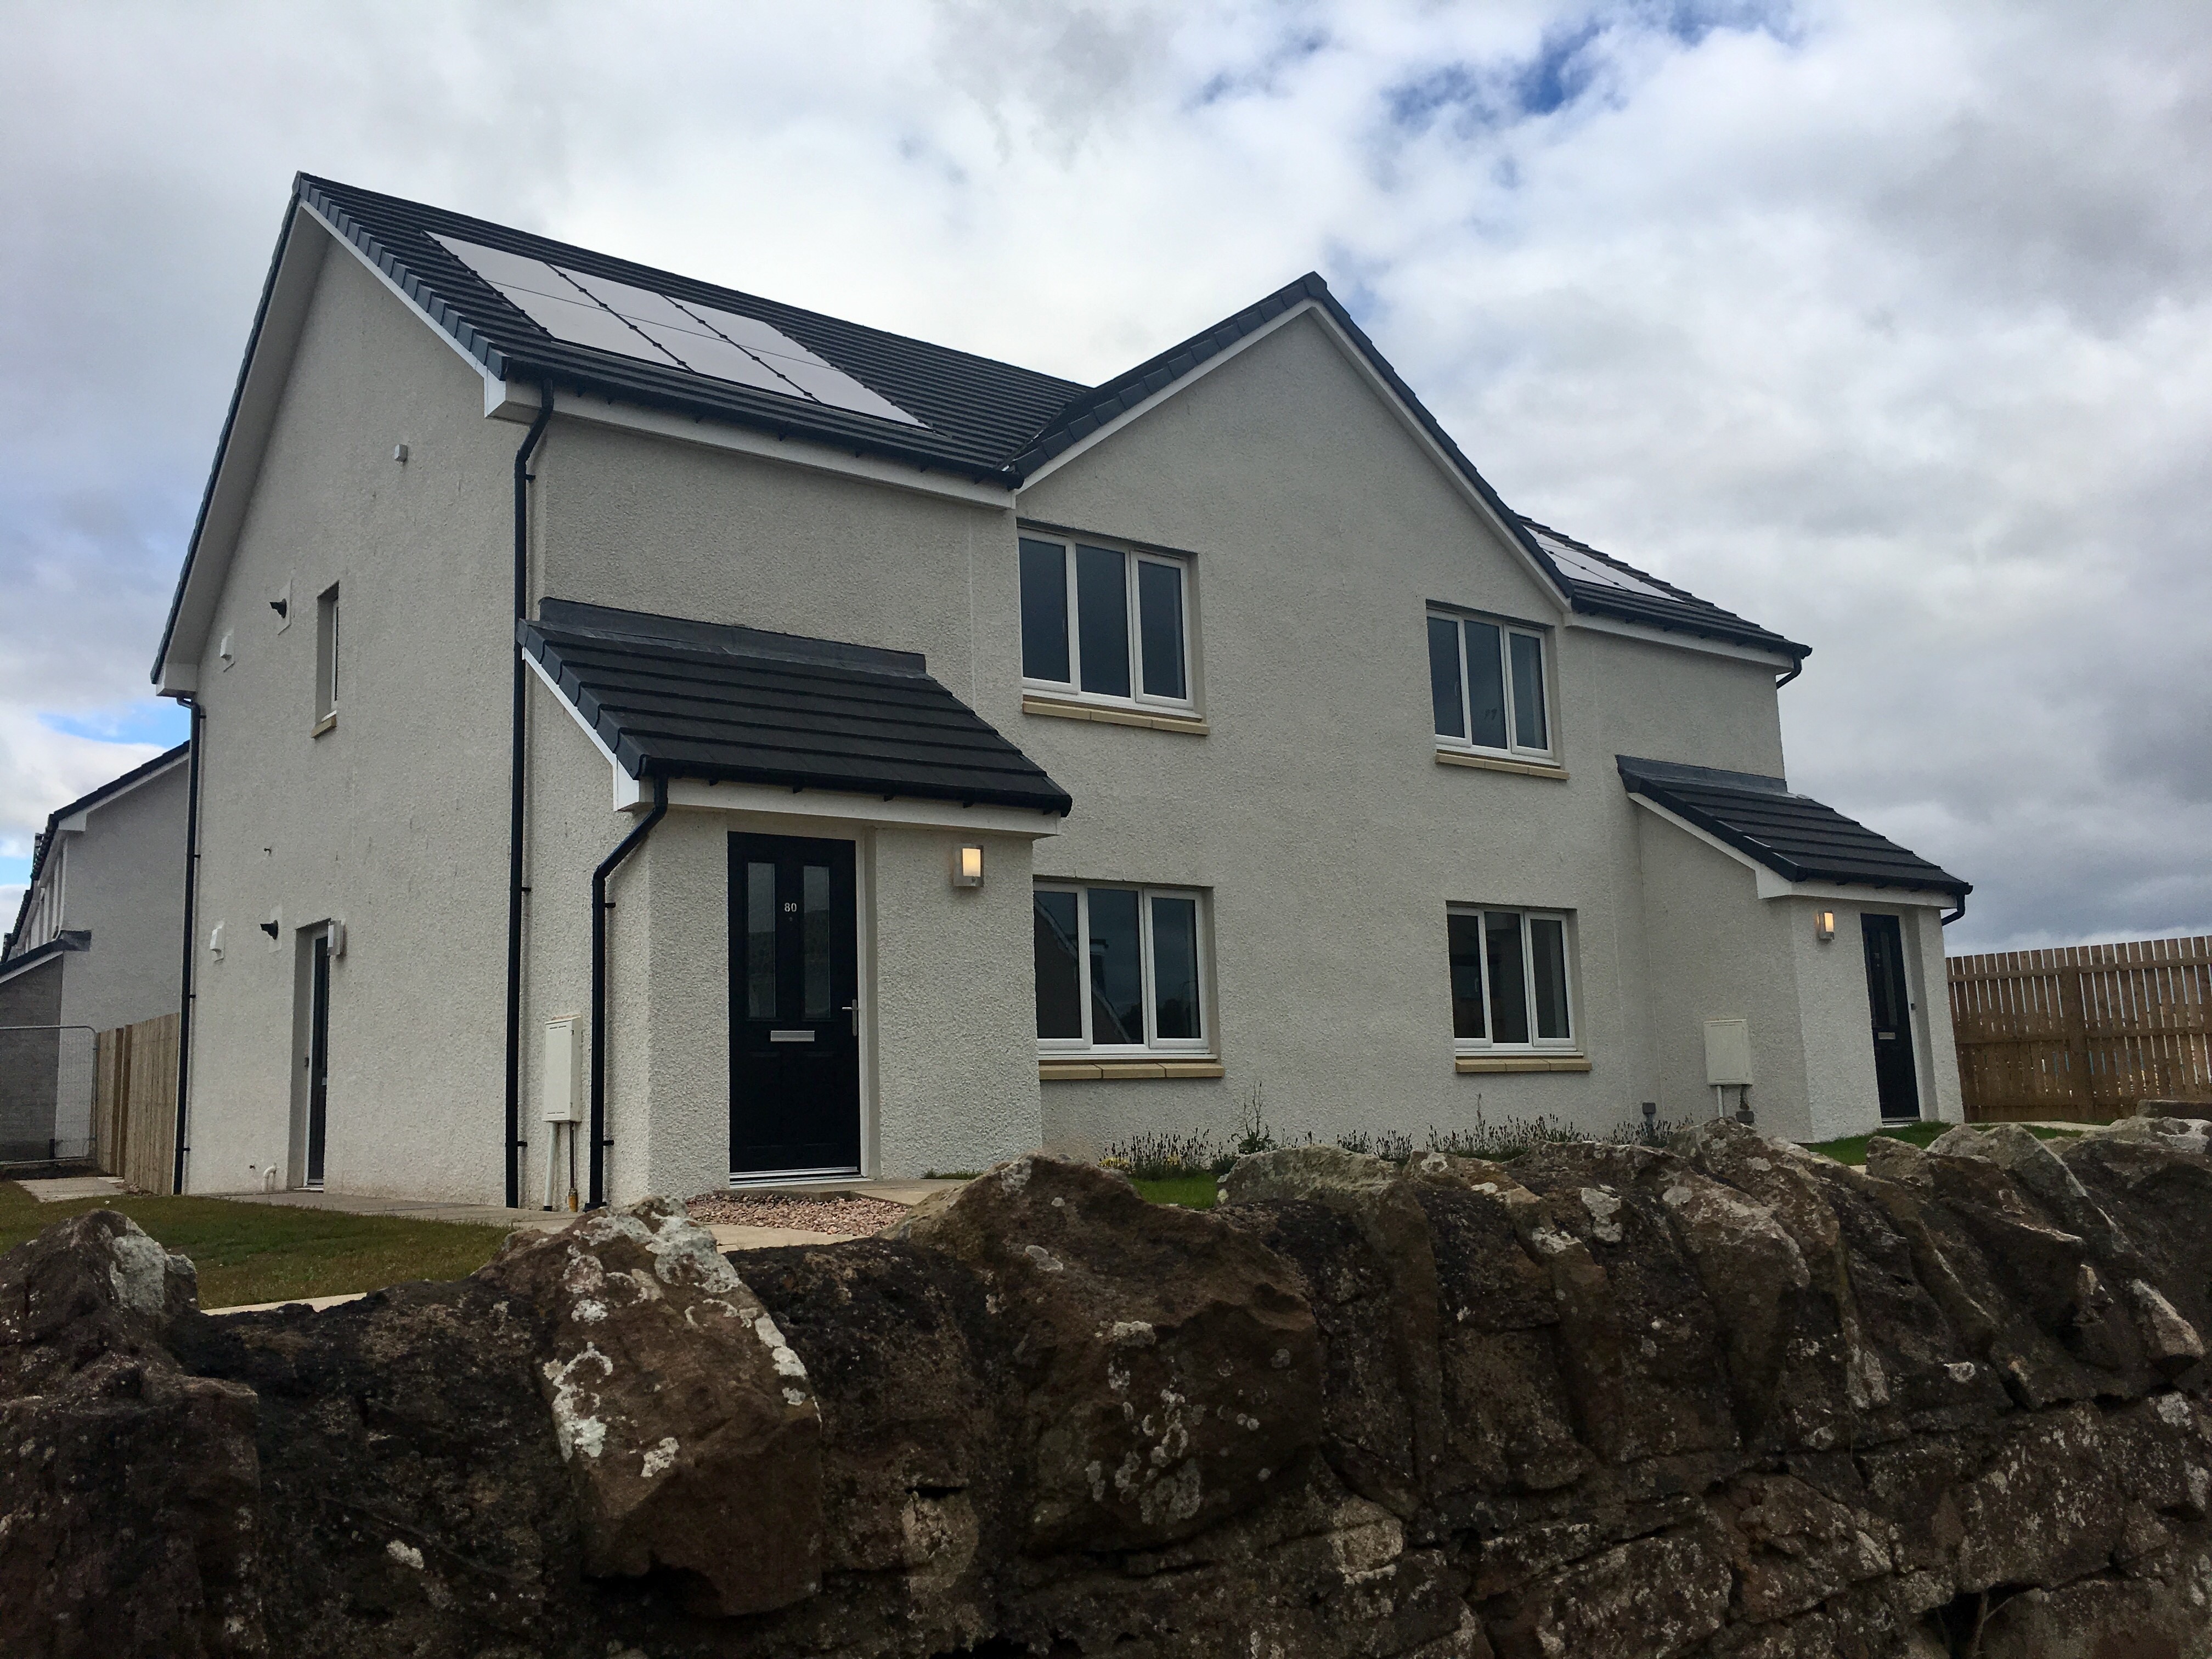 Angus and Cairn to officially open Arbroath affordable homes